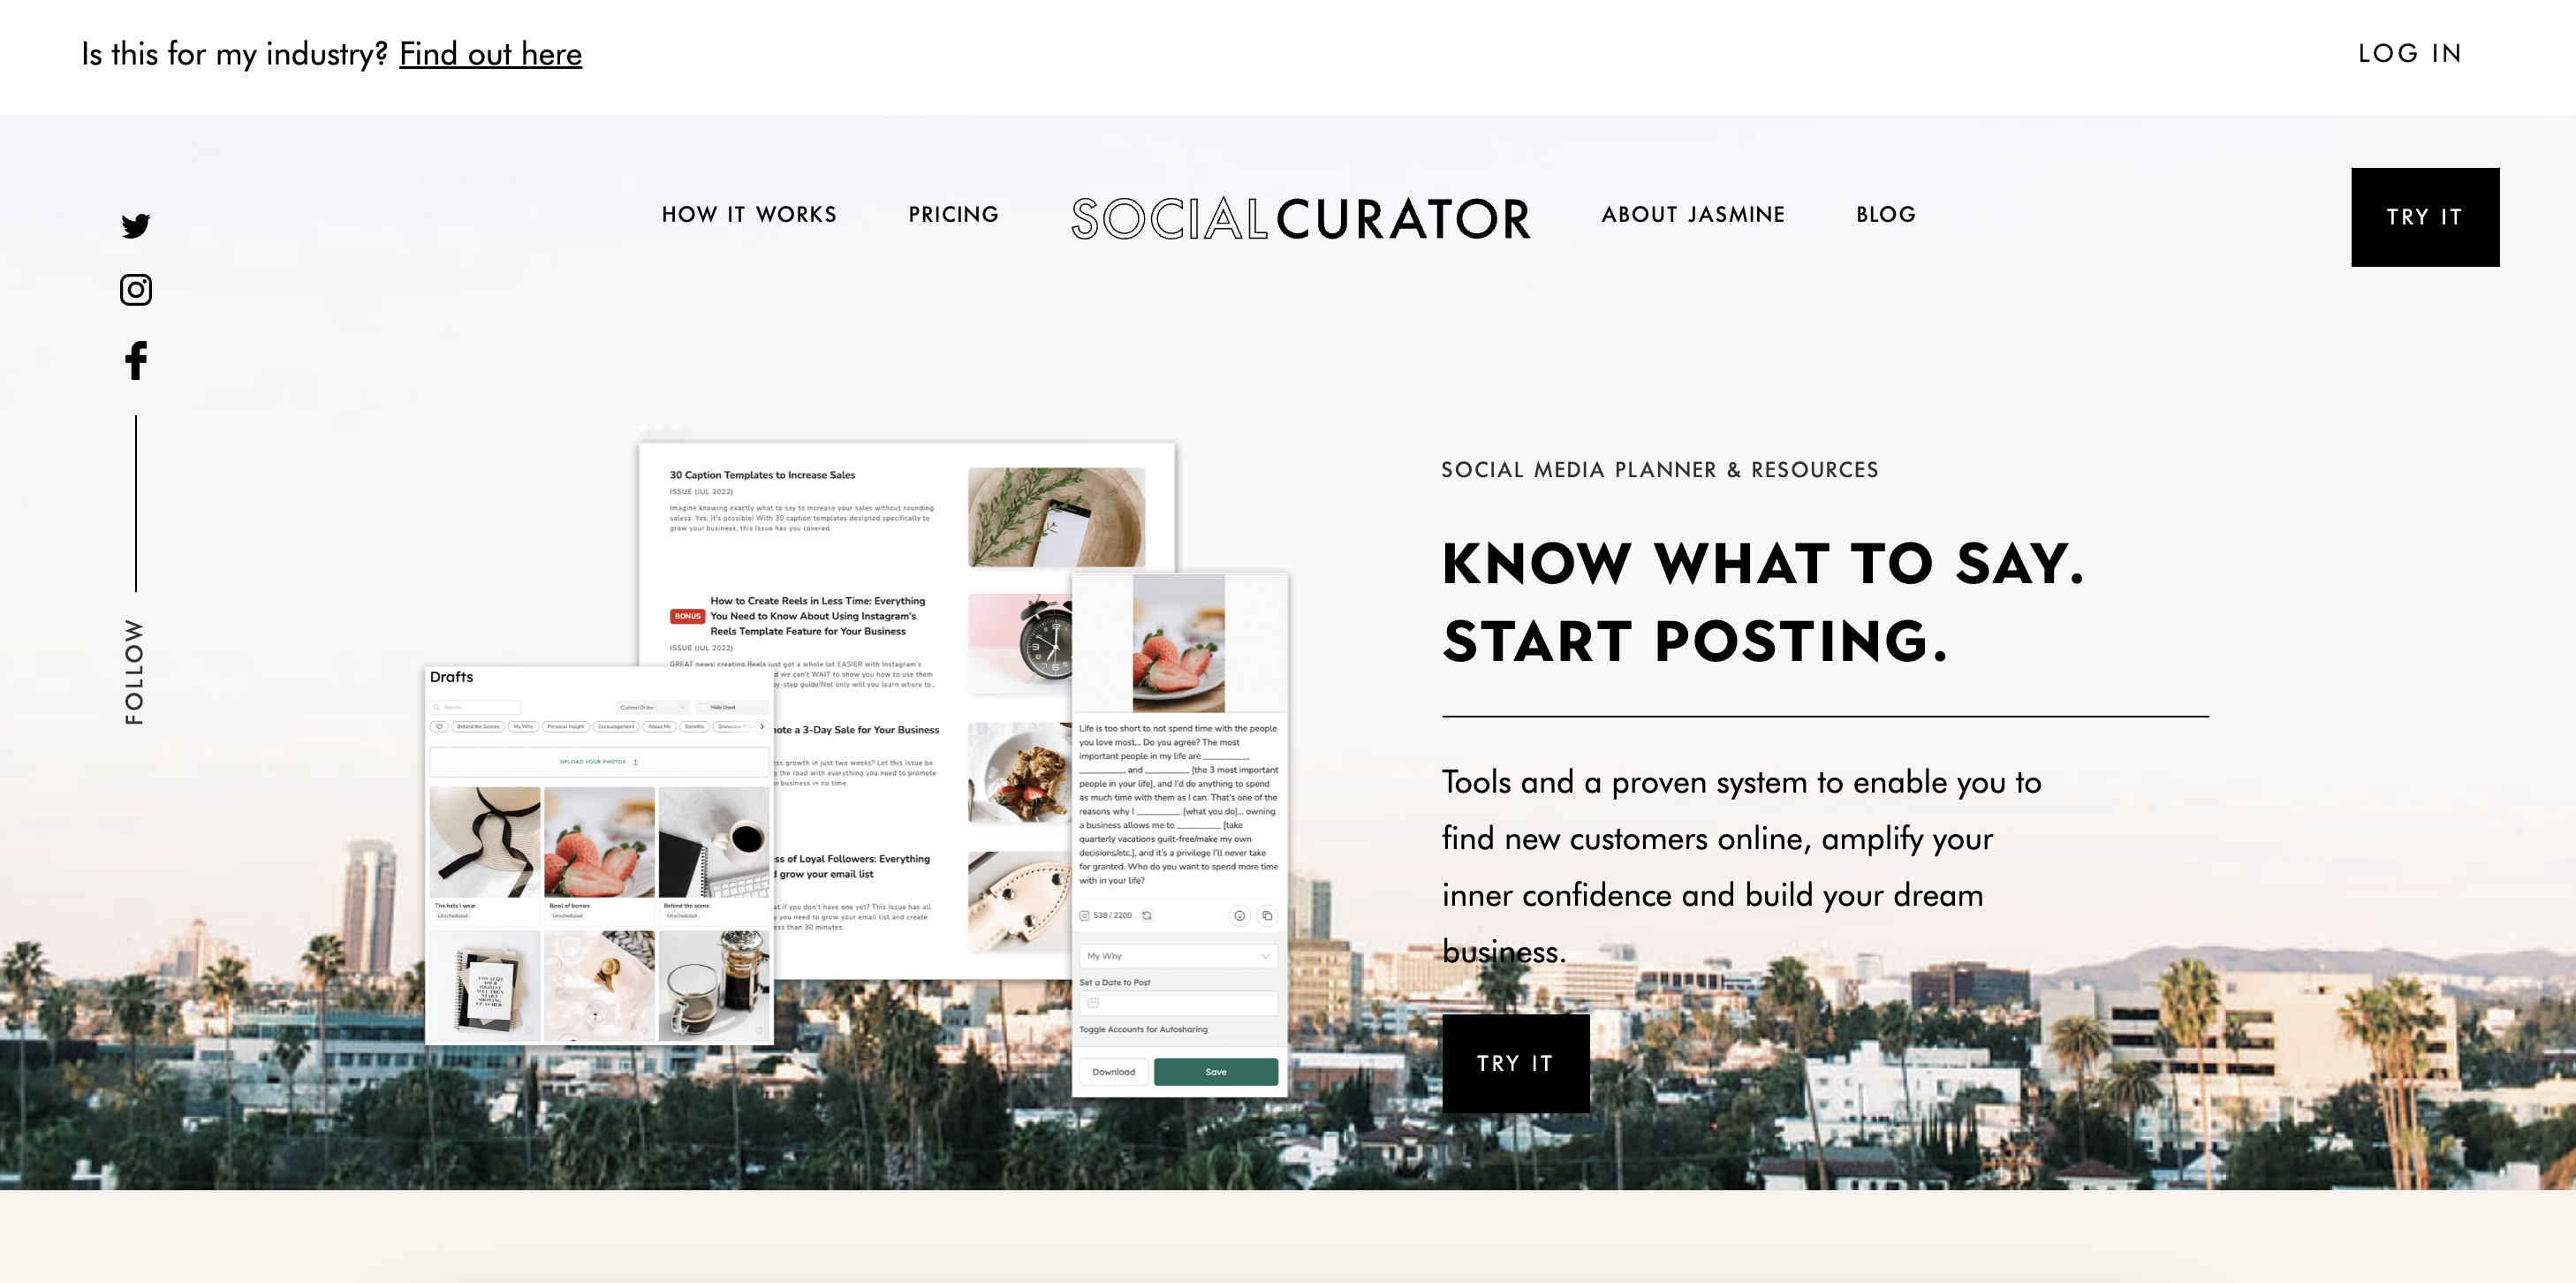 Today's Social Curator site